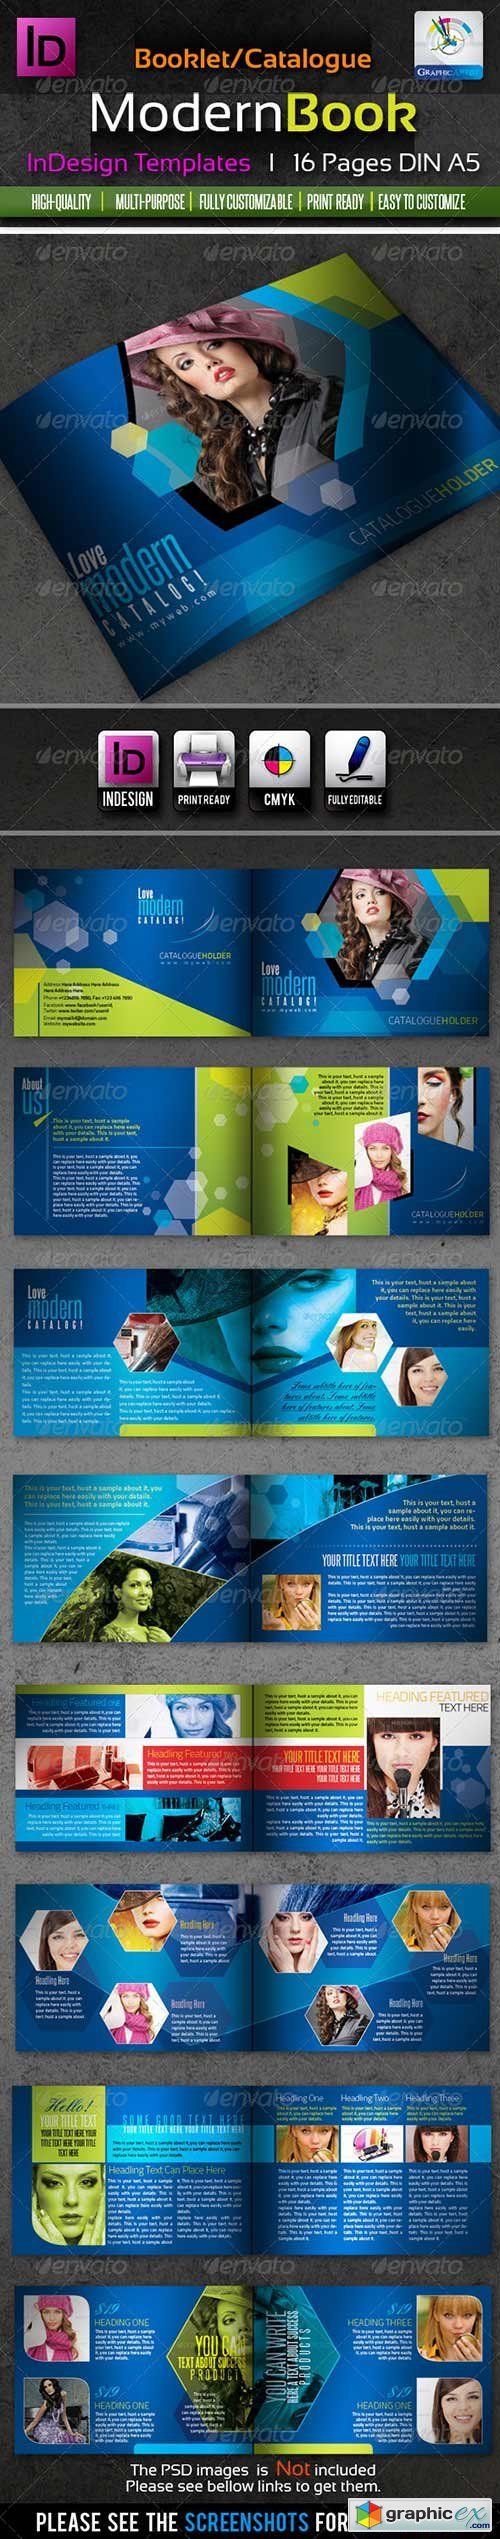 Corporate InDesign Modern Booklet/Catalog 16pages